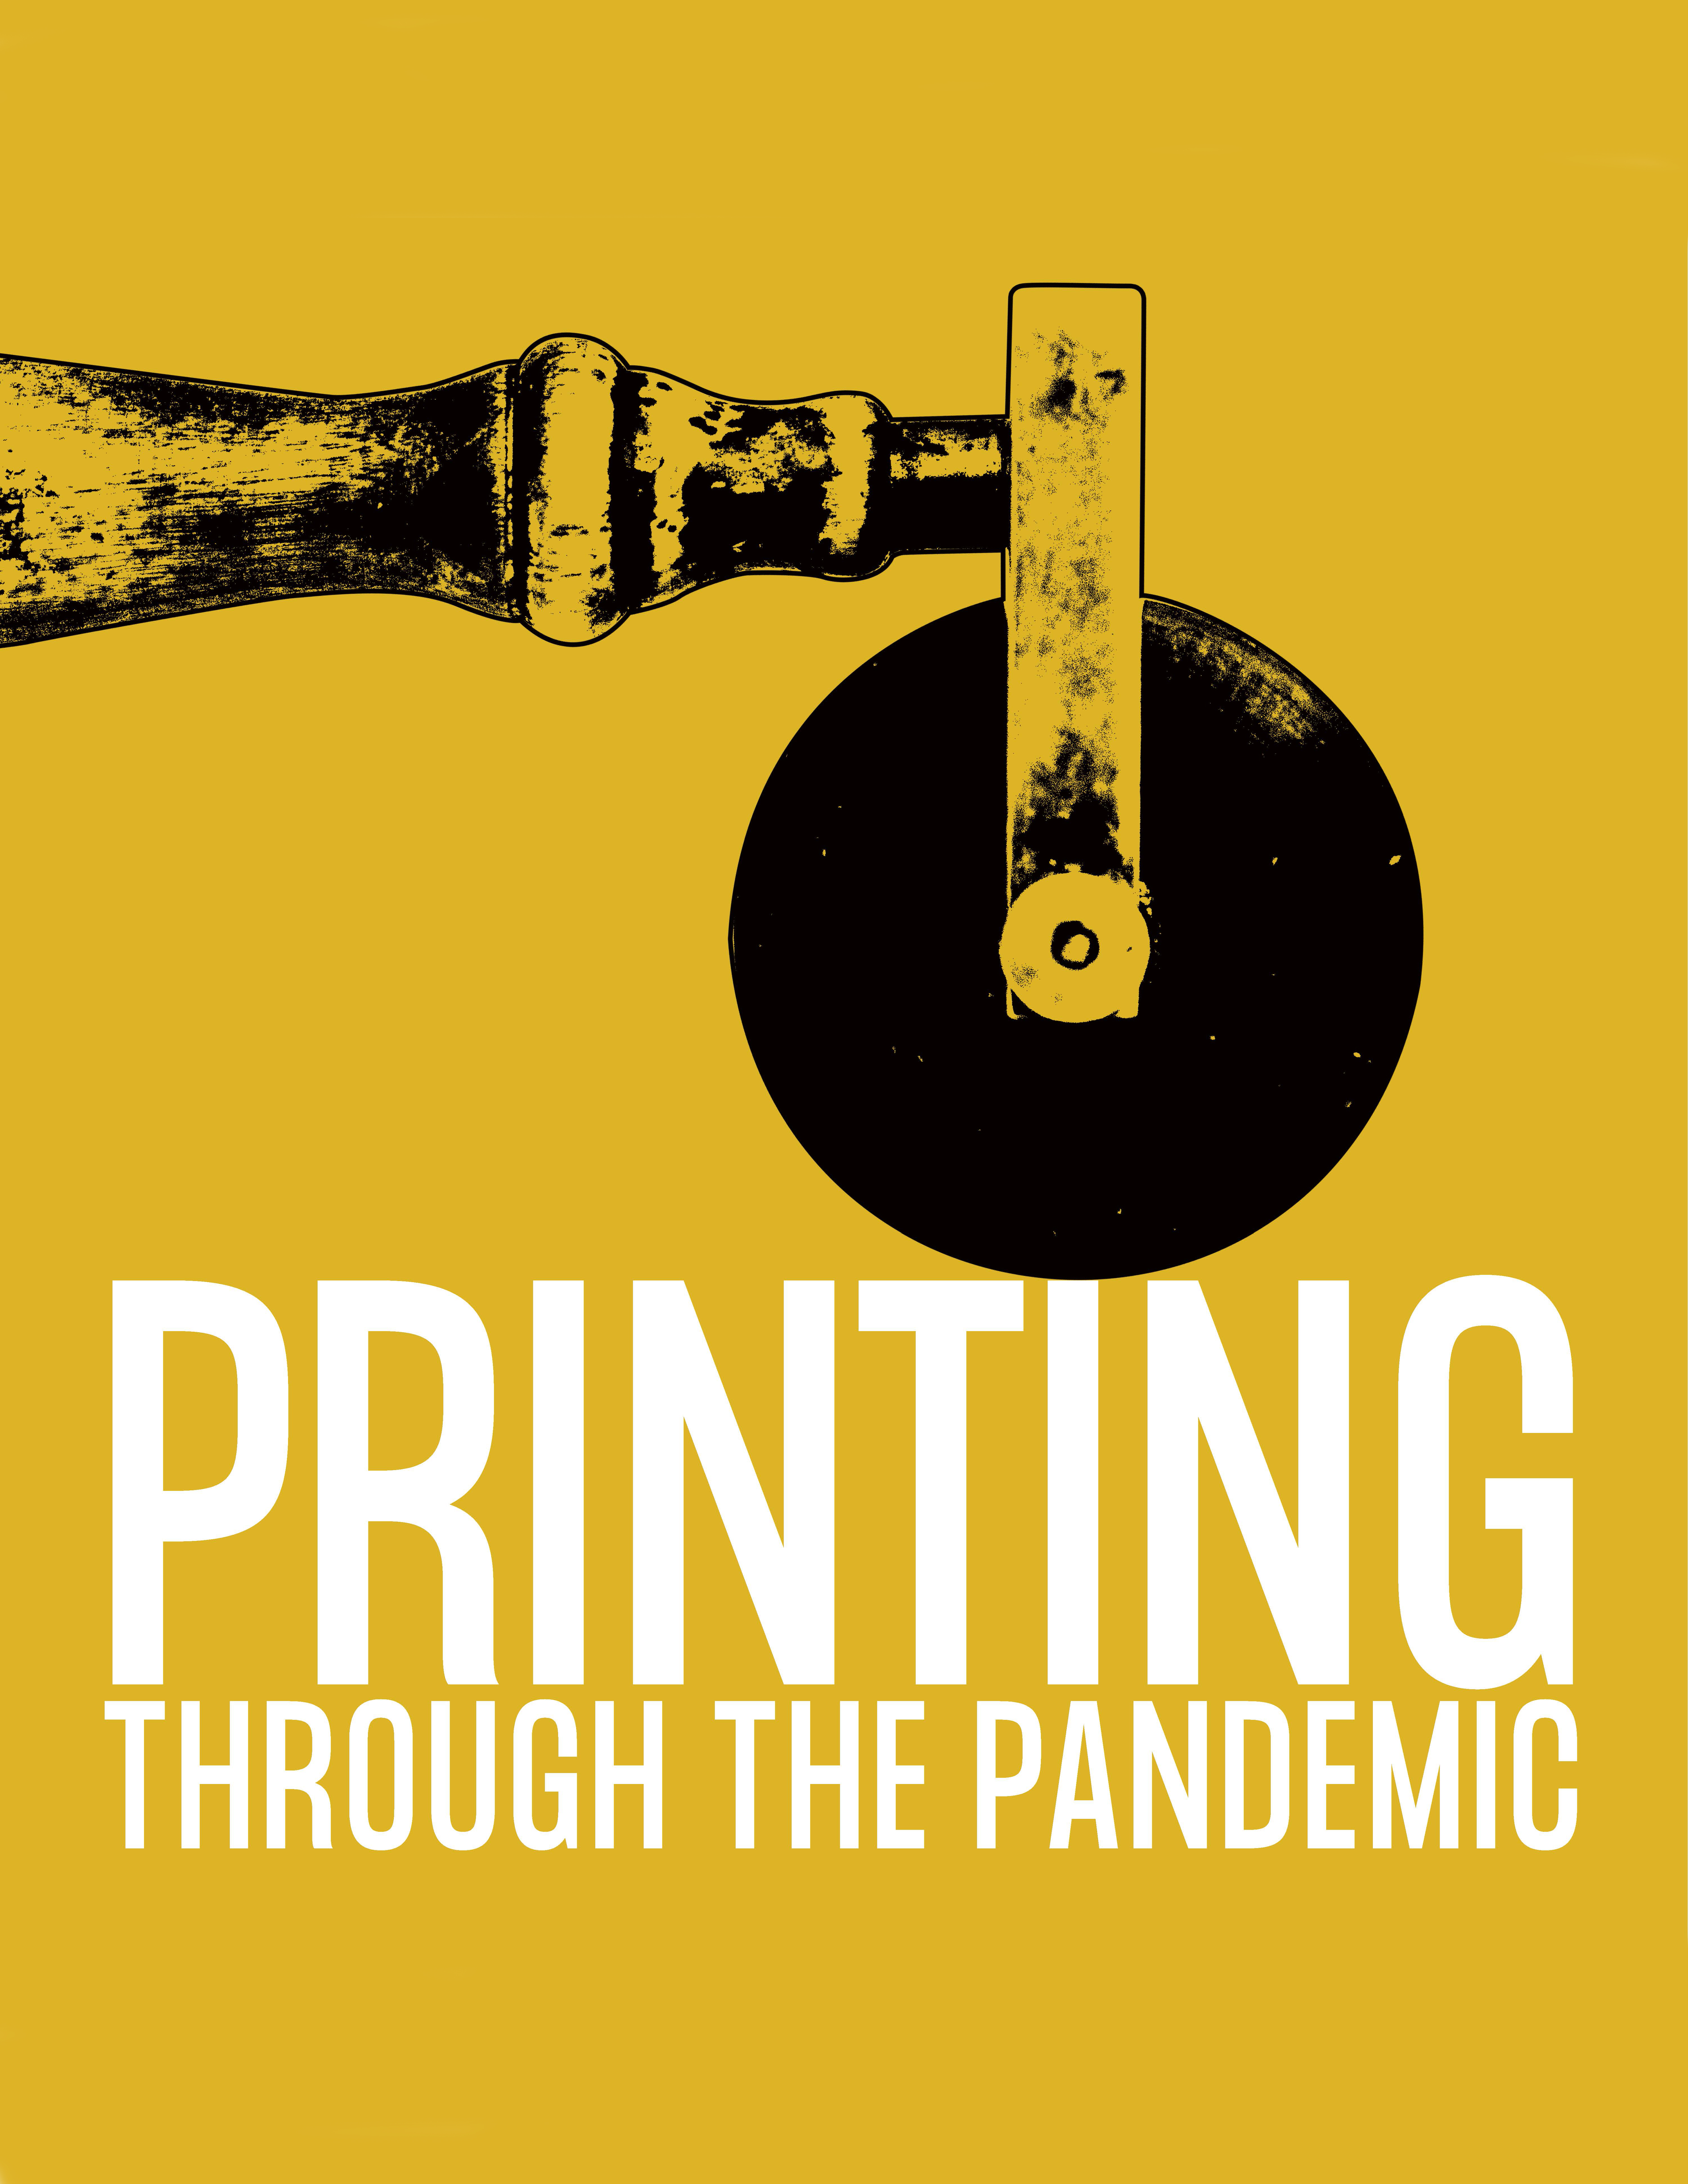 Printing through the Pandemic Digital Exhibition Poster